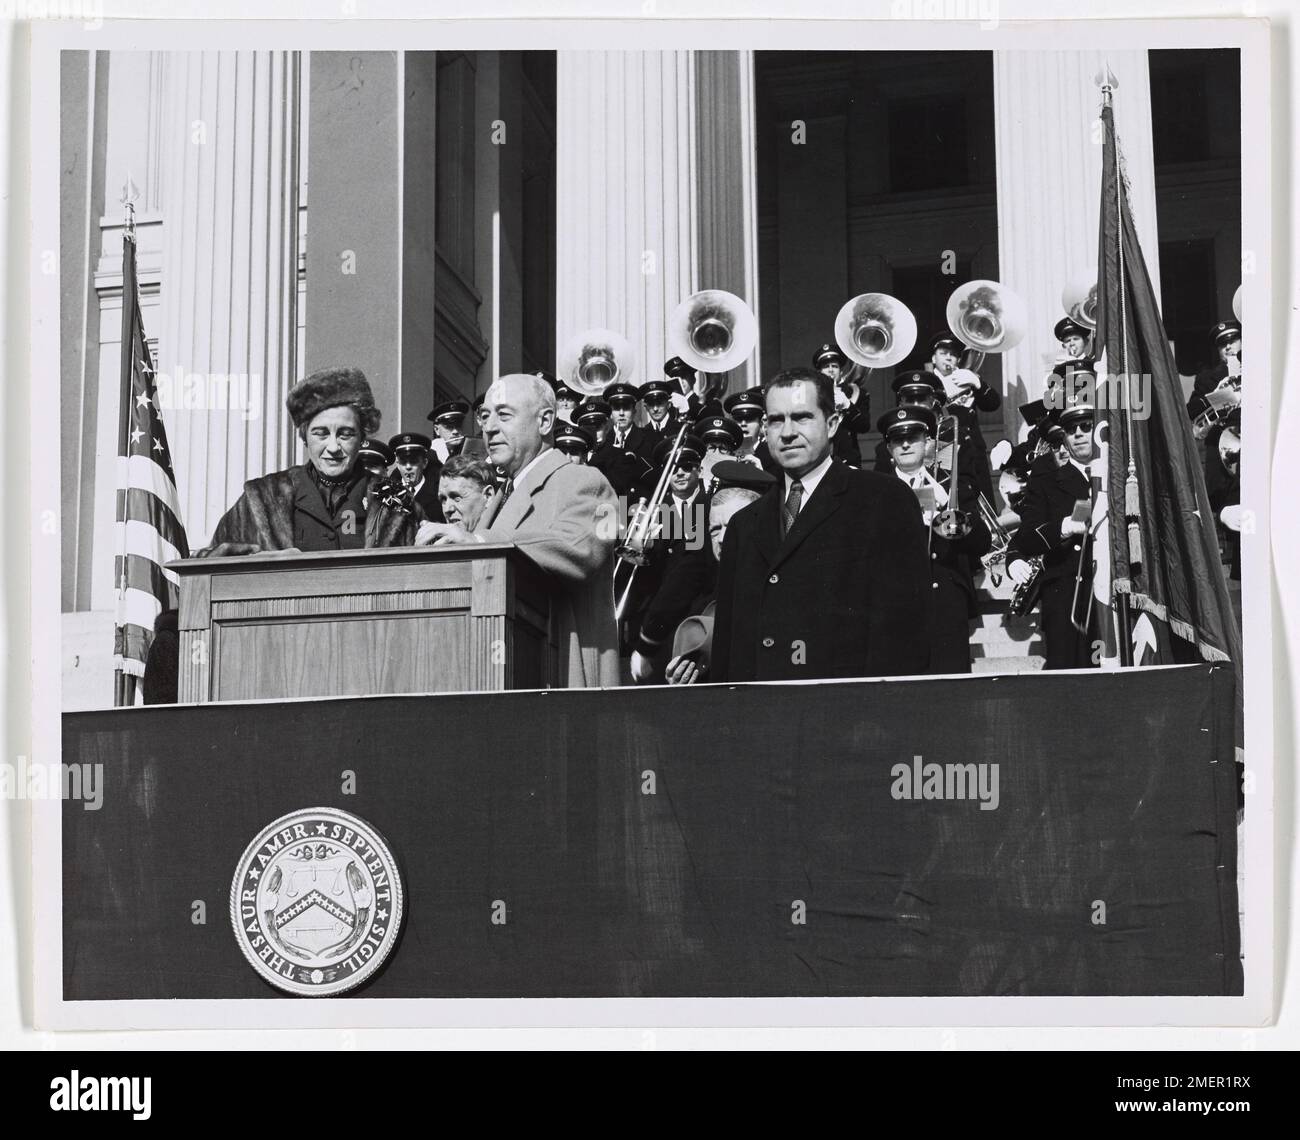 George M. Humphrey and Richard M. Nixon on Opening Day of Alexander Hamilton Bicentennial in Washington, DC. Picture shows George M. Humphrey and woman at podium and Richard Nixon standing to the left of the podium. Stock Photo